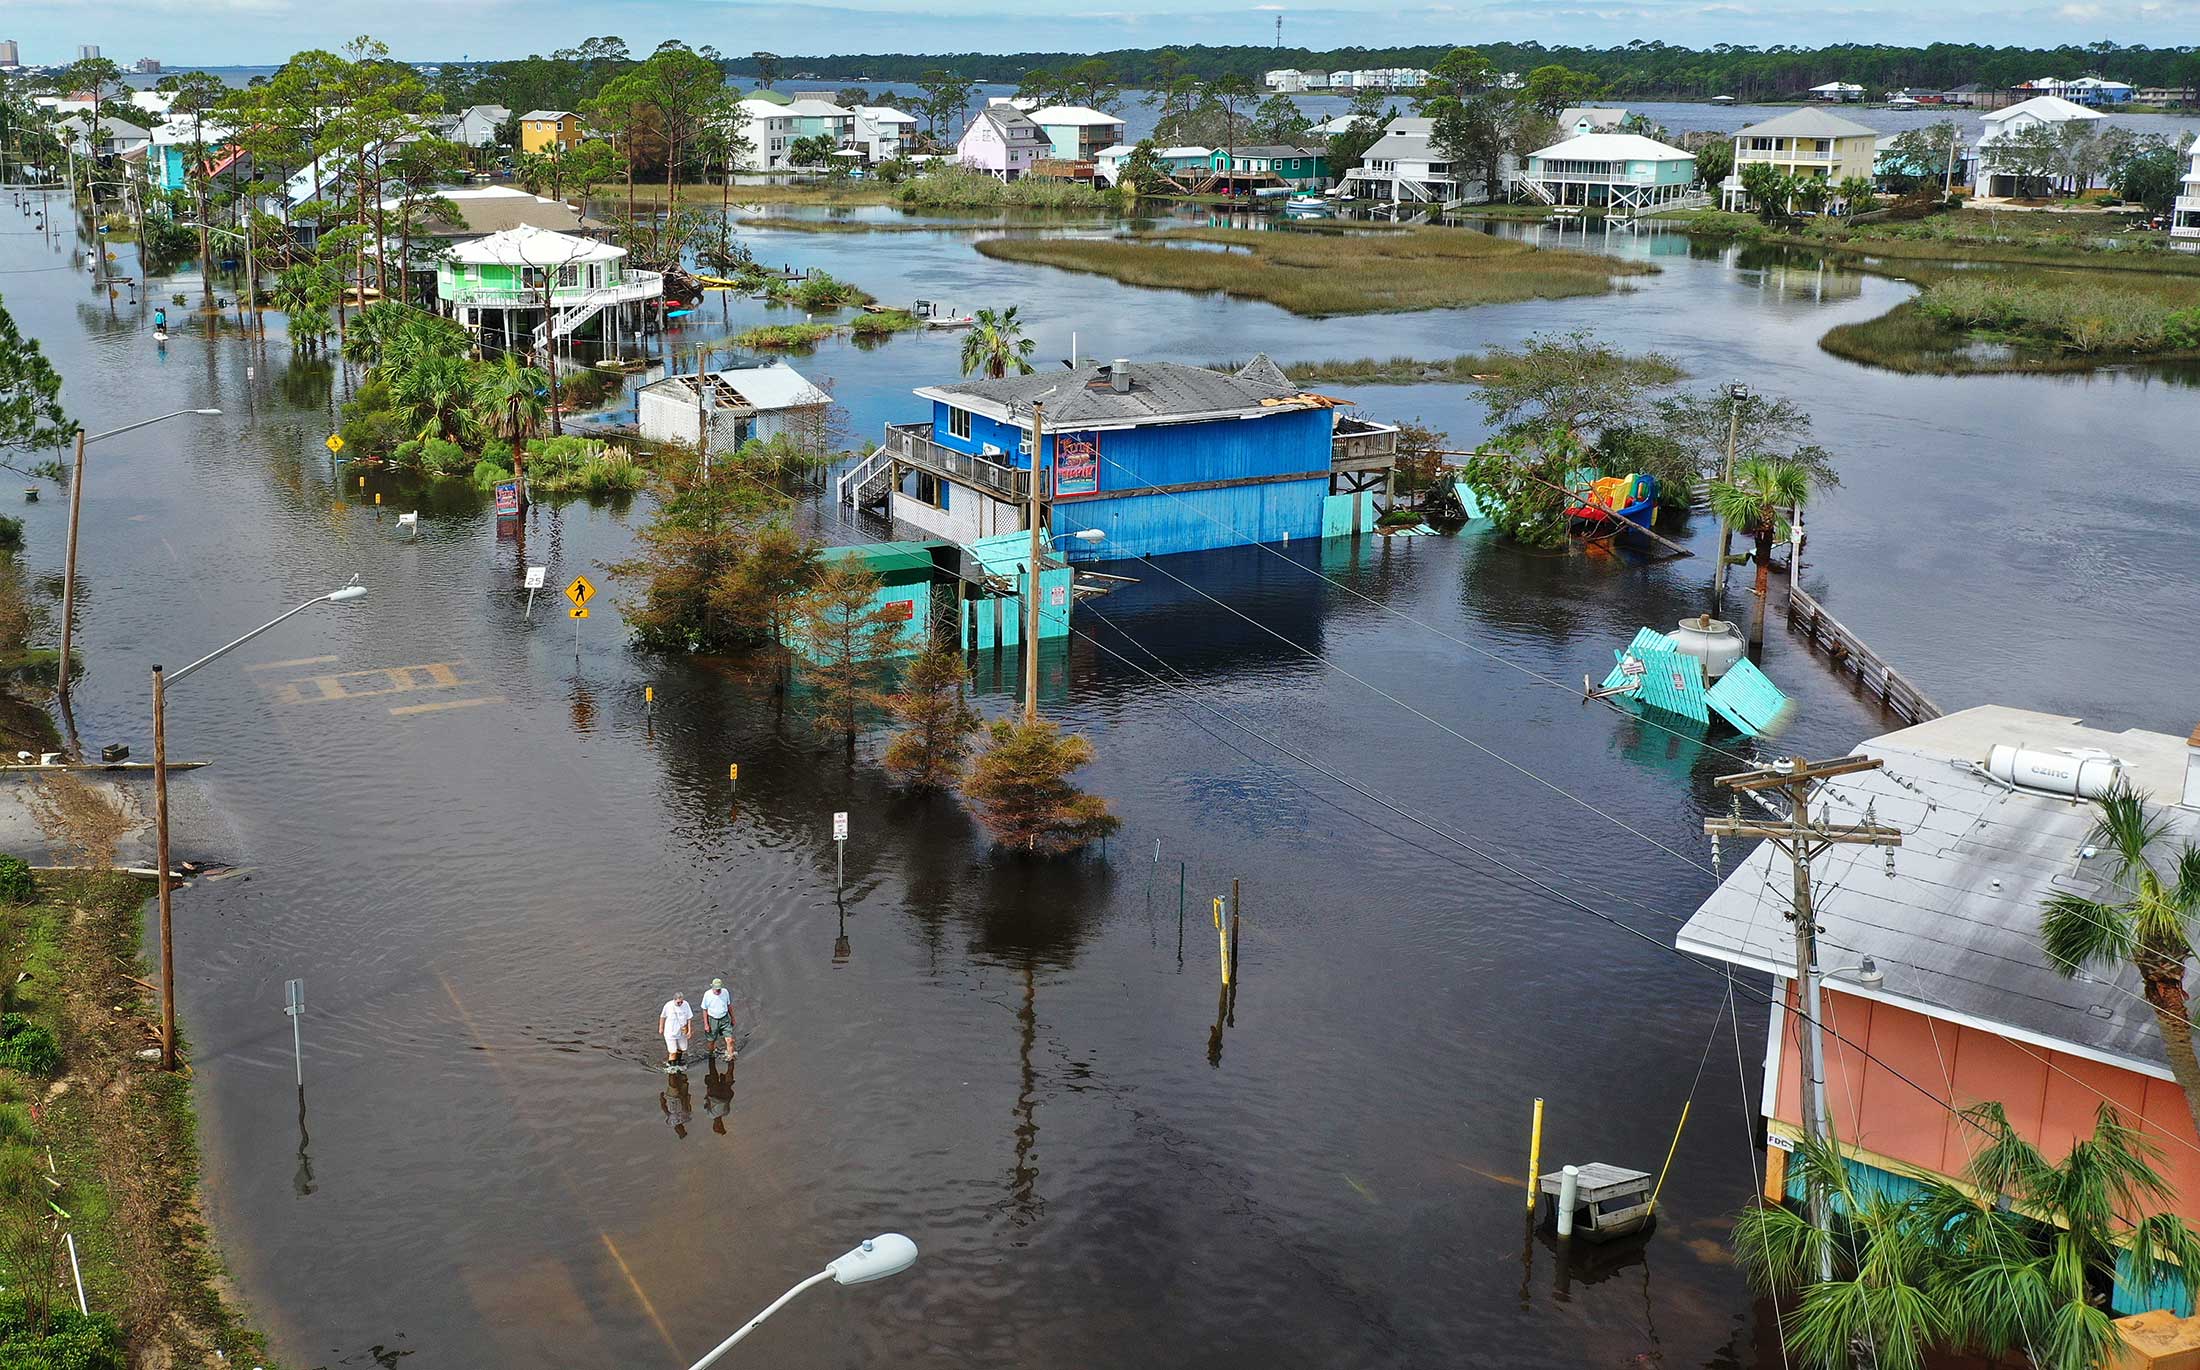 People walk through a flooded street after Hurricane Sally passed through&nbsp;Gulf Shores, Florida on Sept 17.